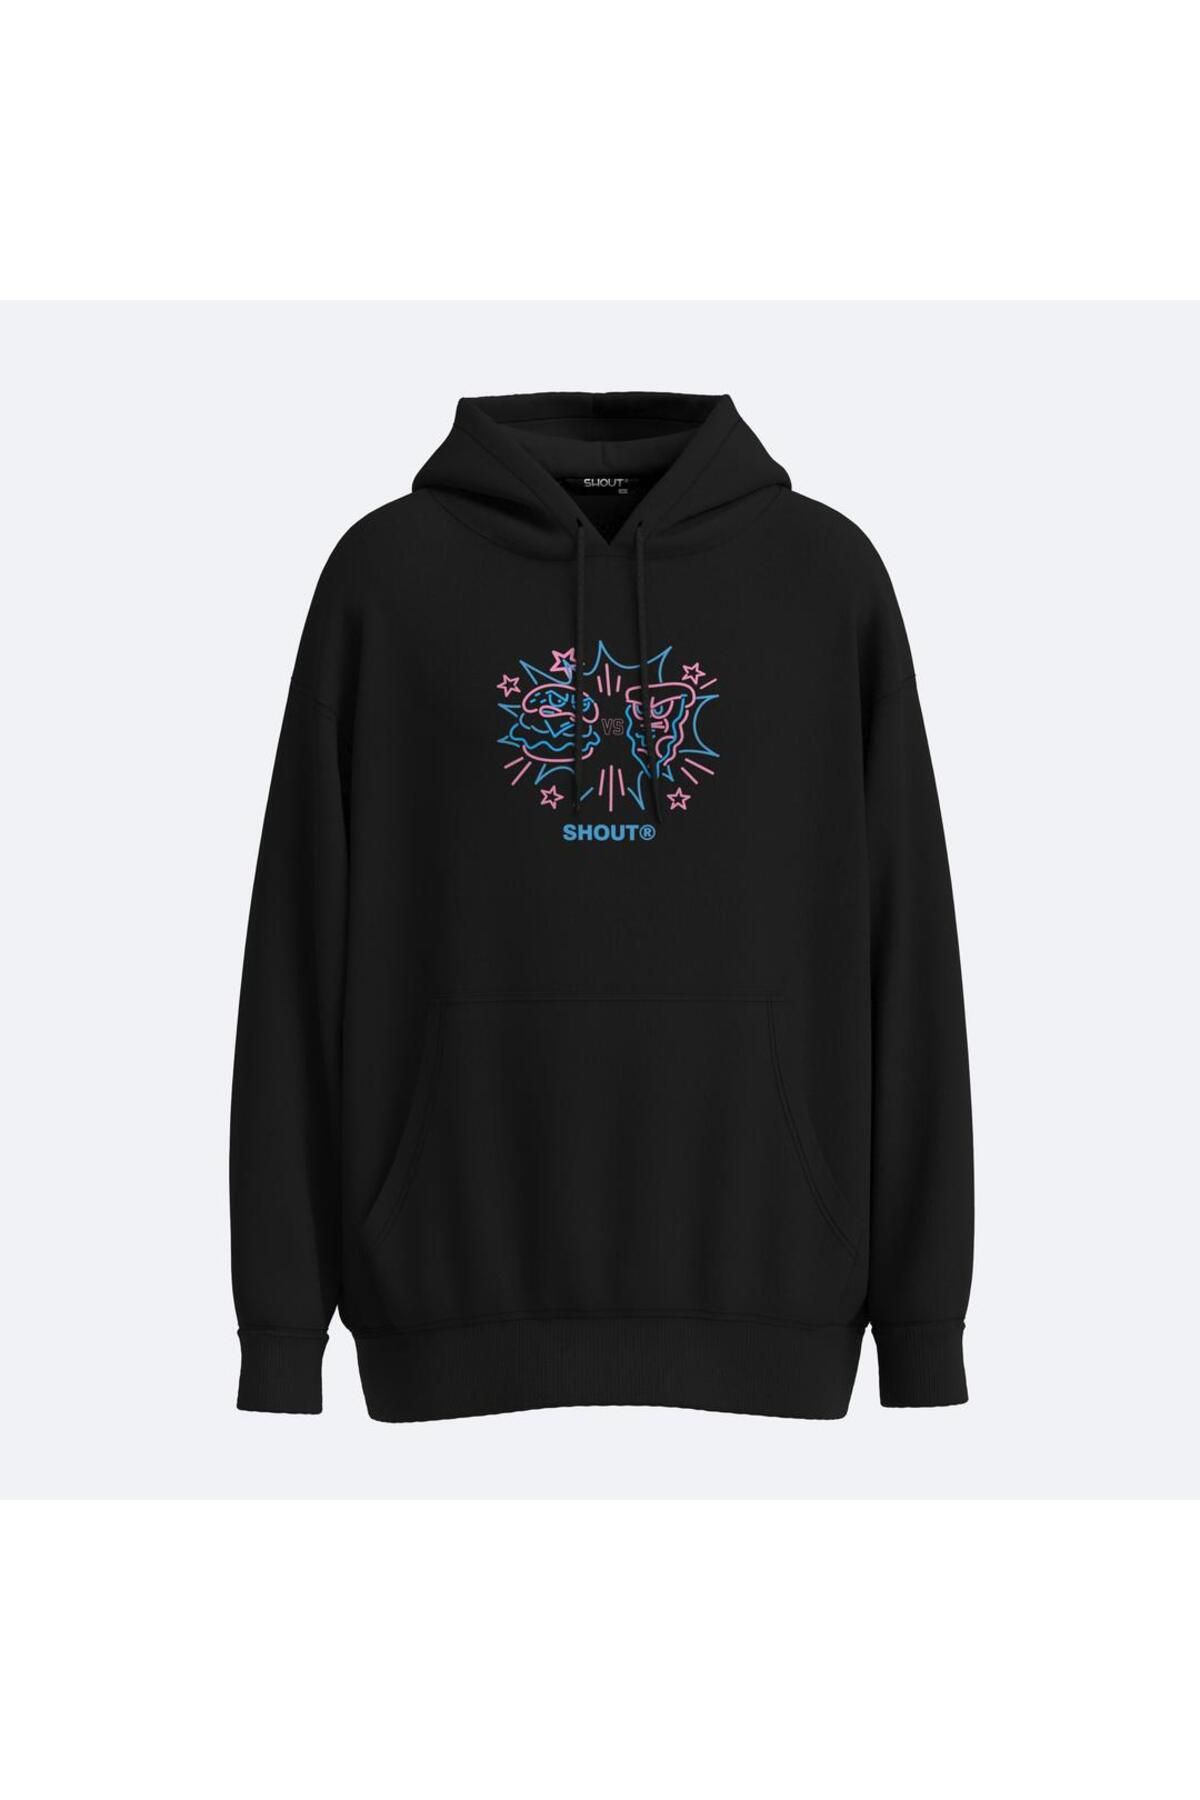 Shout Oversize Championship 1987 Food Fight Unisex Hoodie